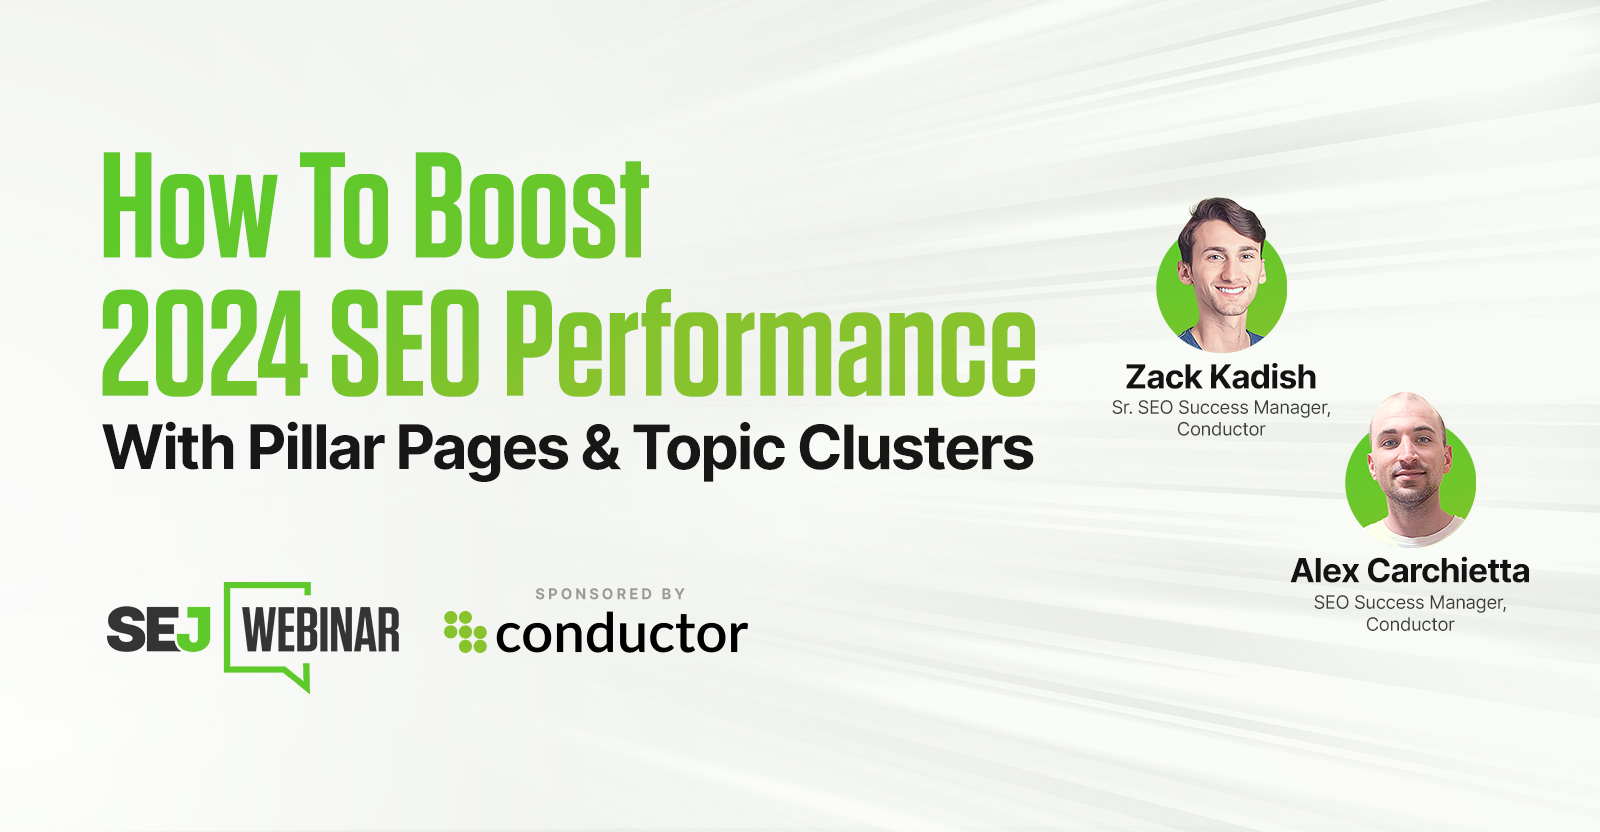 Upgrade Your SEO & Content Strategy With Pillar Pages & Topic Clusters [Webinar]